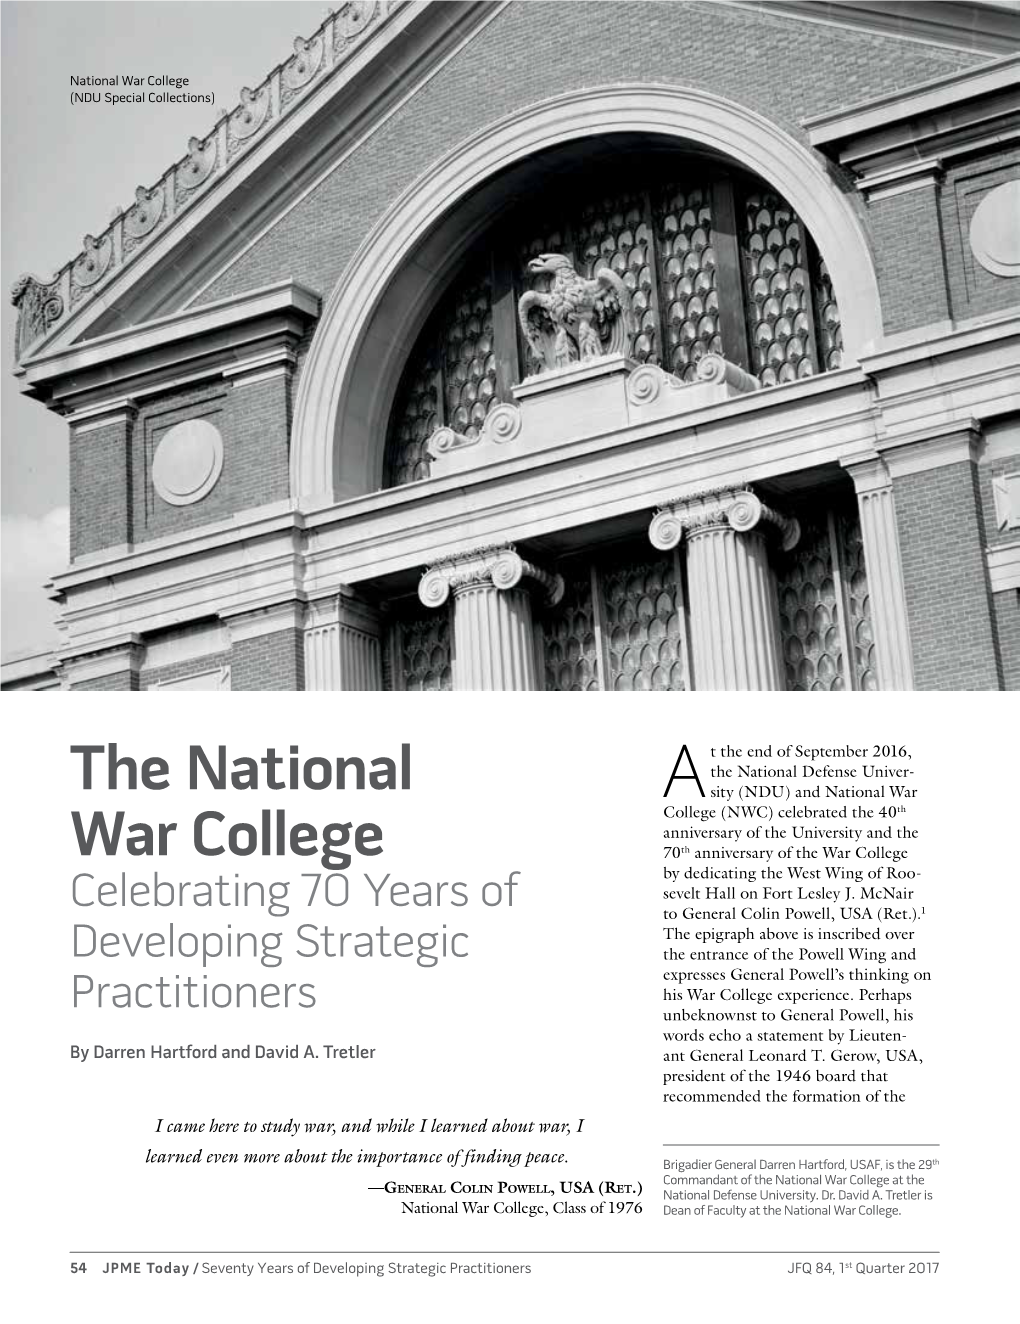 The National War College at the —General Colin Powell, USA (Ret.) National Defense University